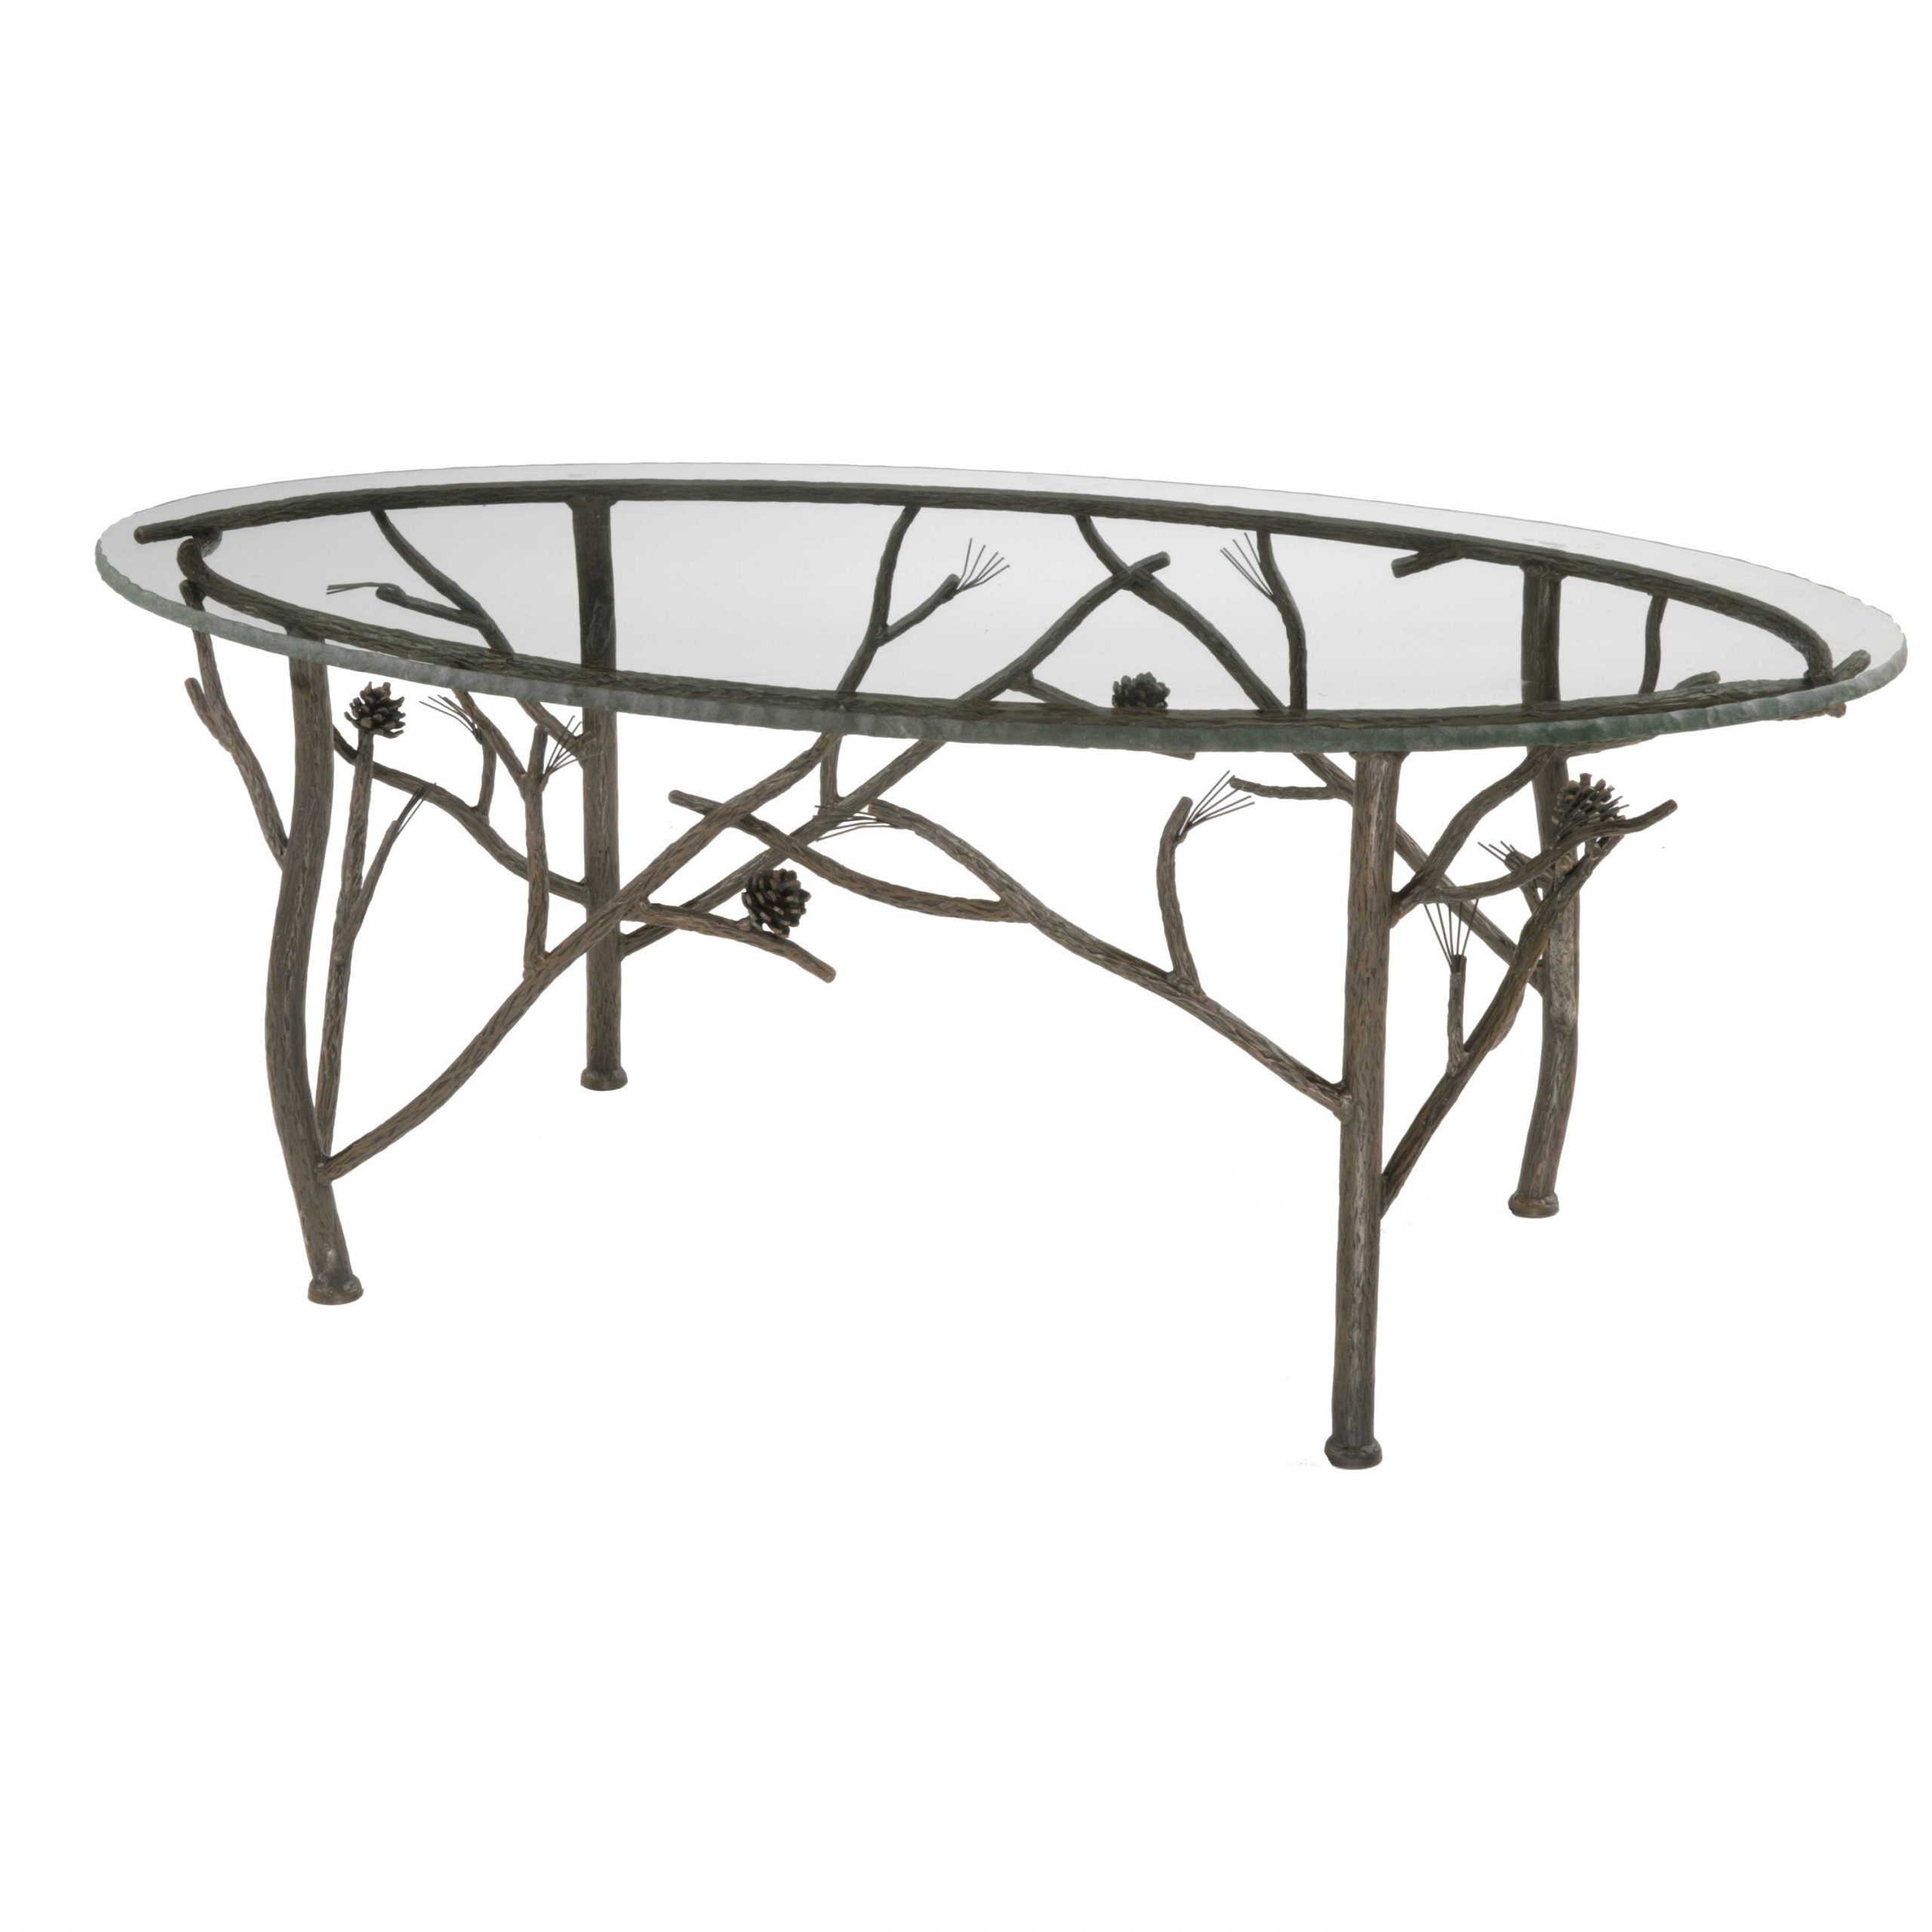 Rustic Pine Oval Coffee Table Within Most Popular Wrought Iron Cocktail Tables (View 14 of 20)